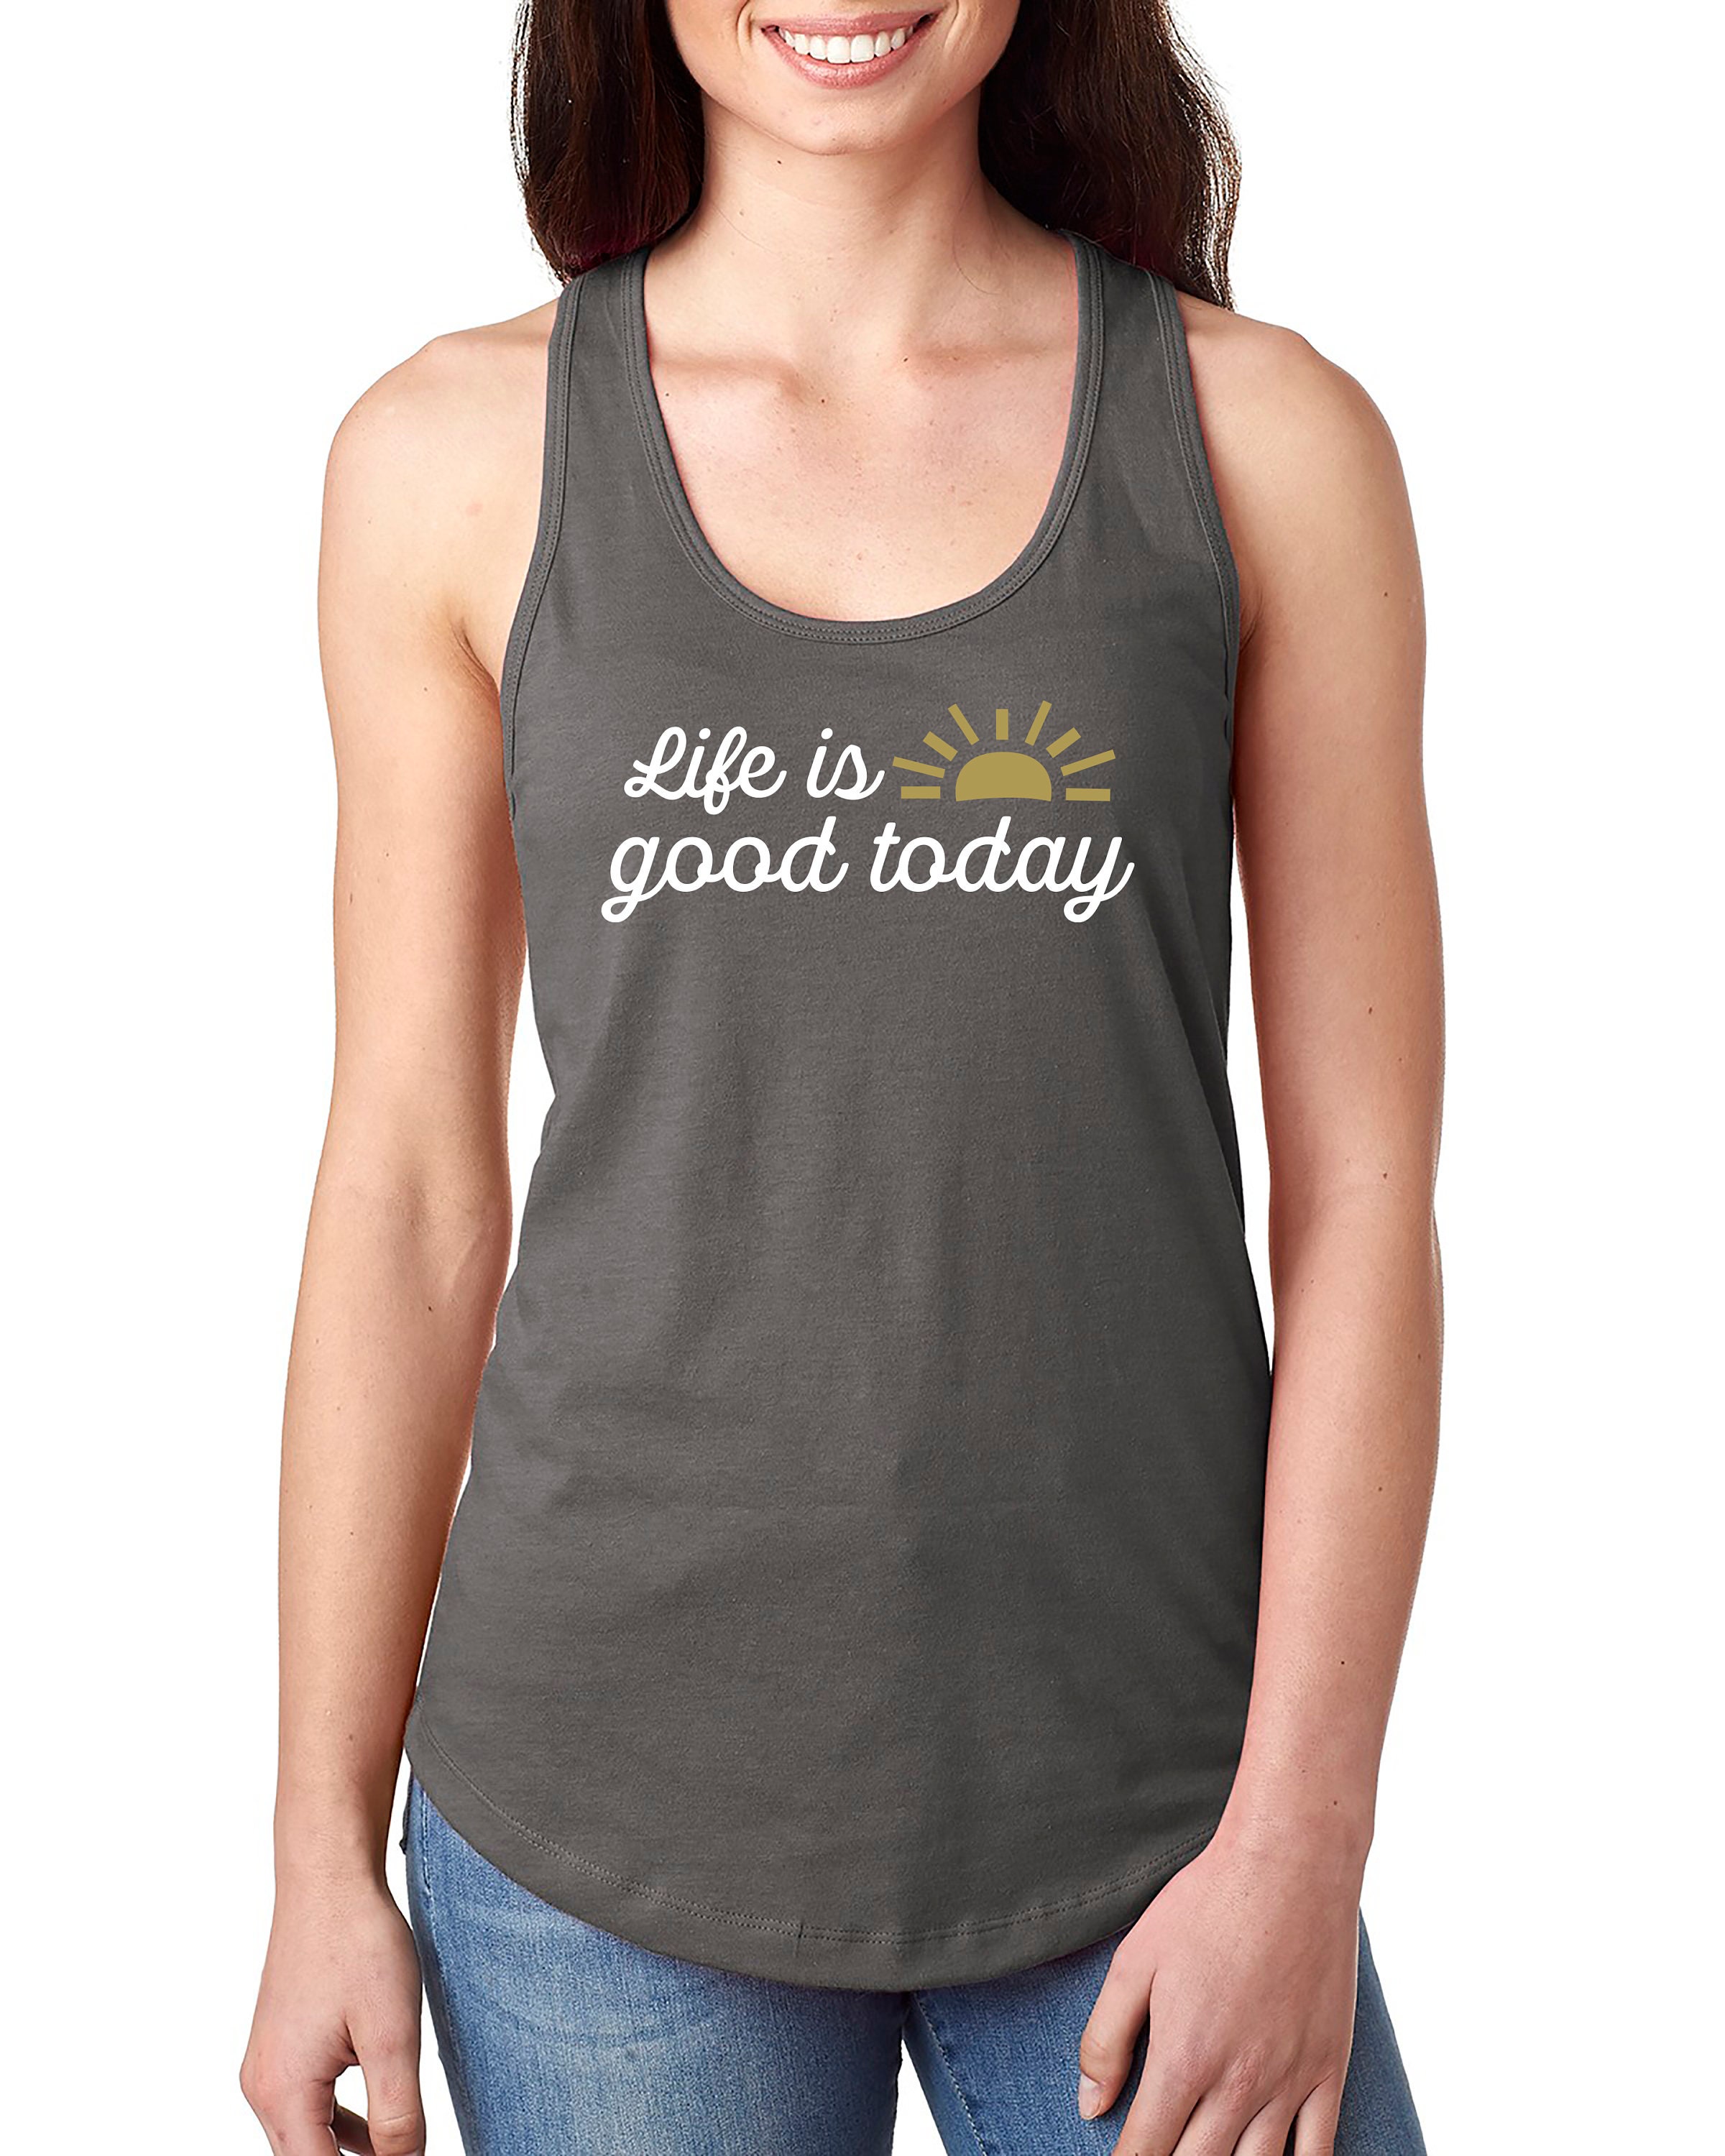 Life is good today tank top Country music tank top Sunshine | Etsy